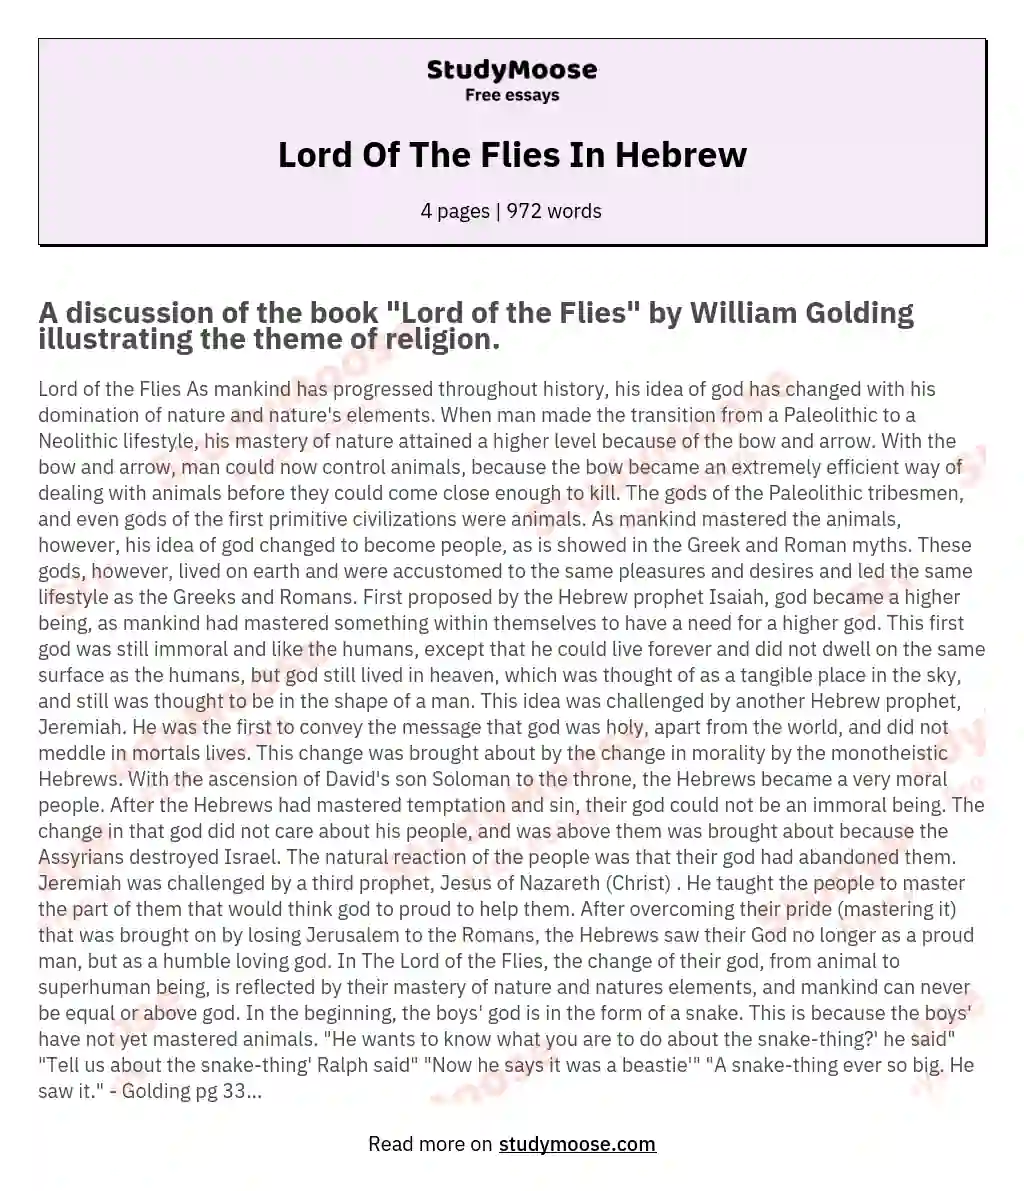 Lord Of The Flies In Hebrew essay